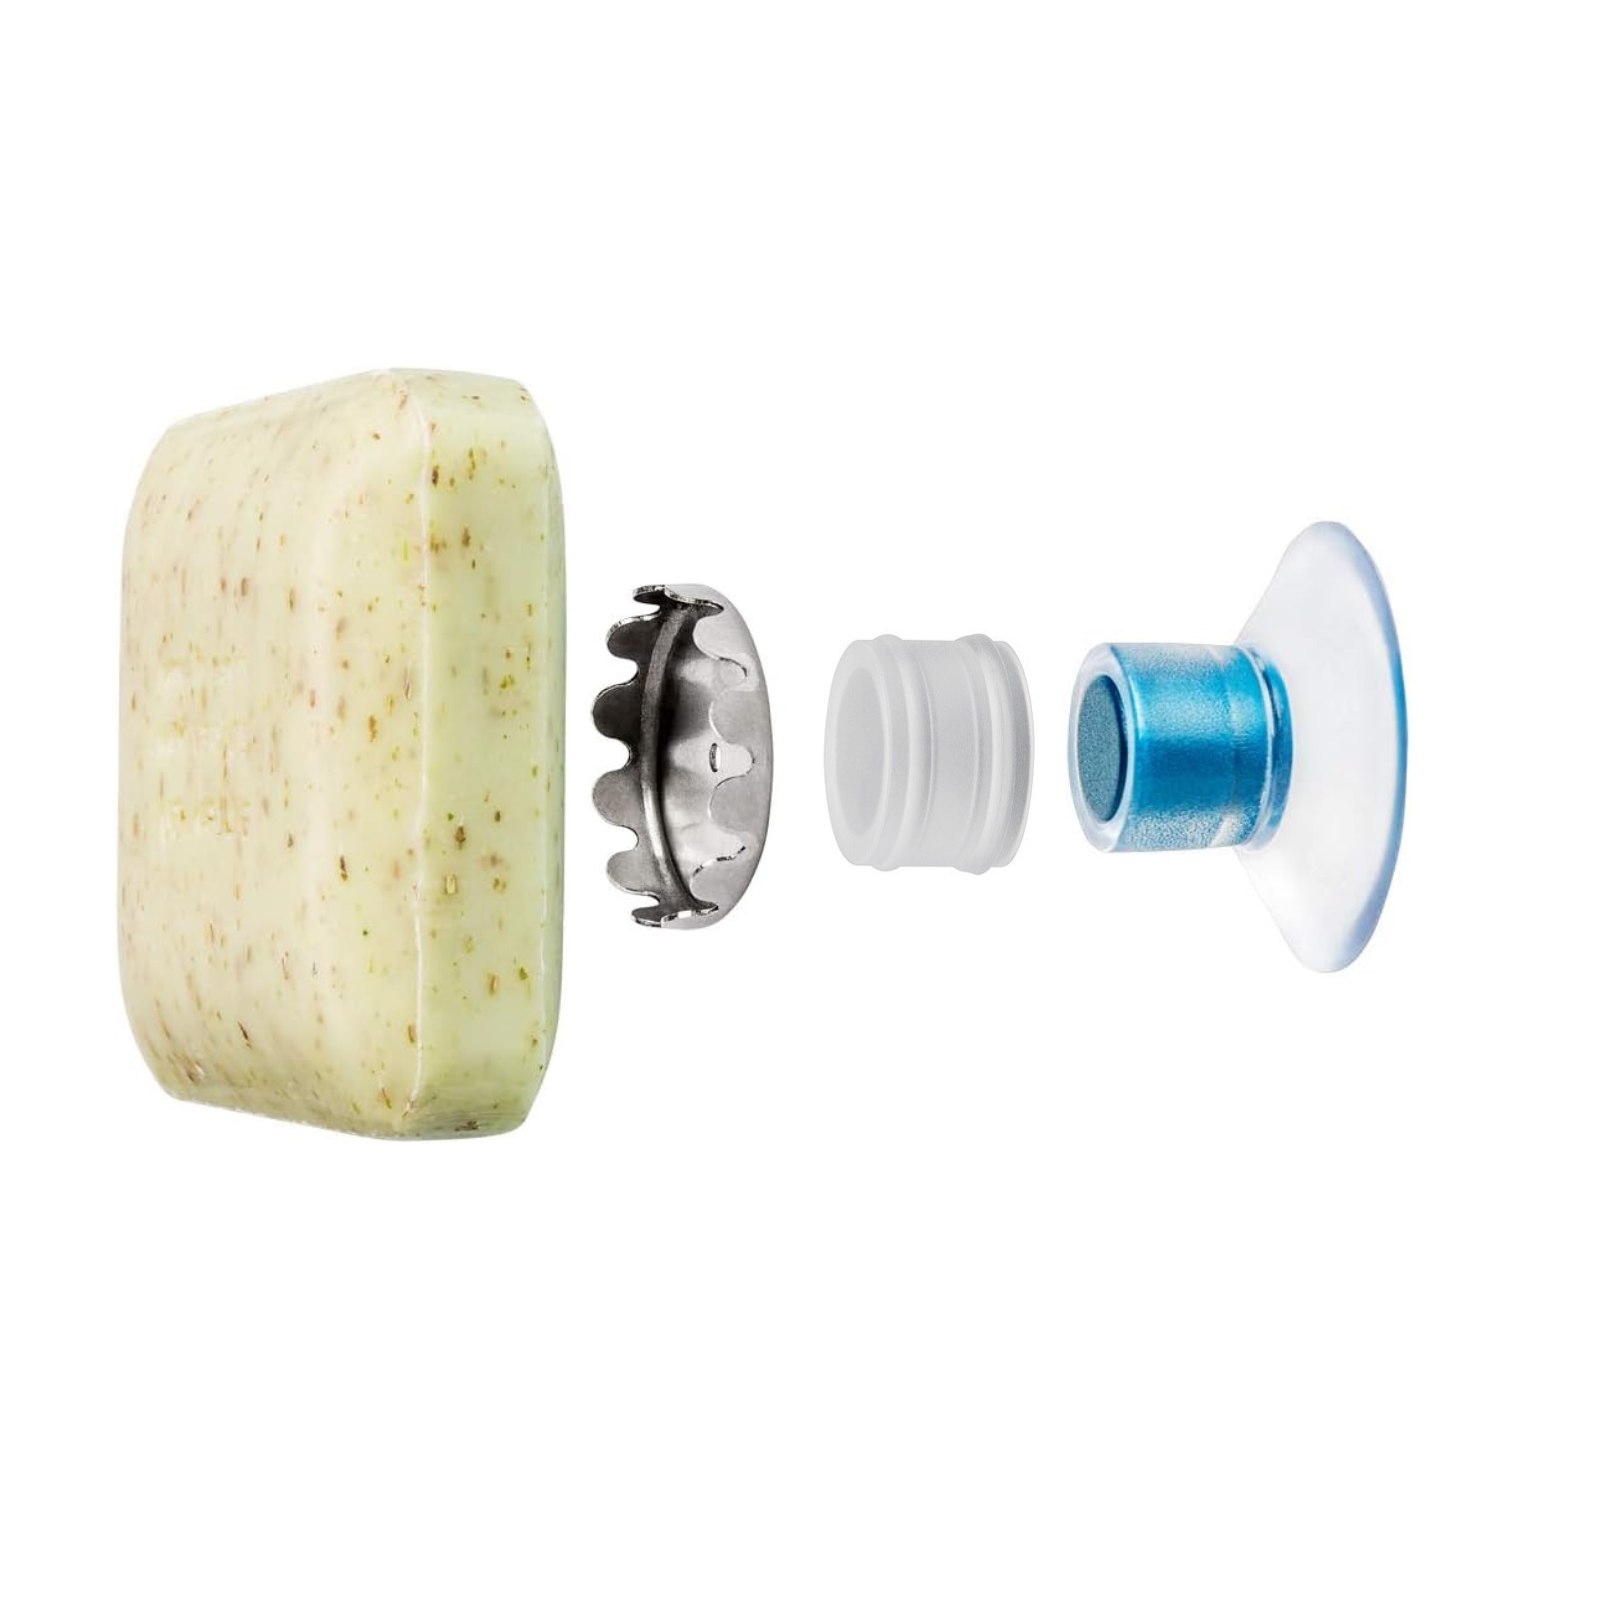 Blue Edition soap holder with Protector